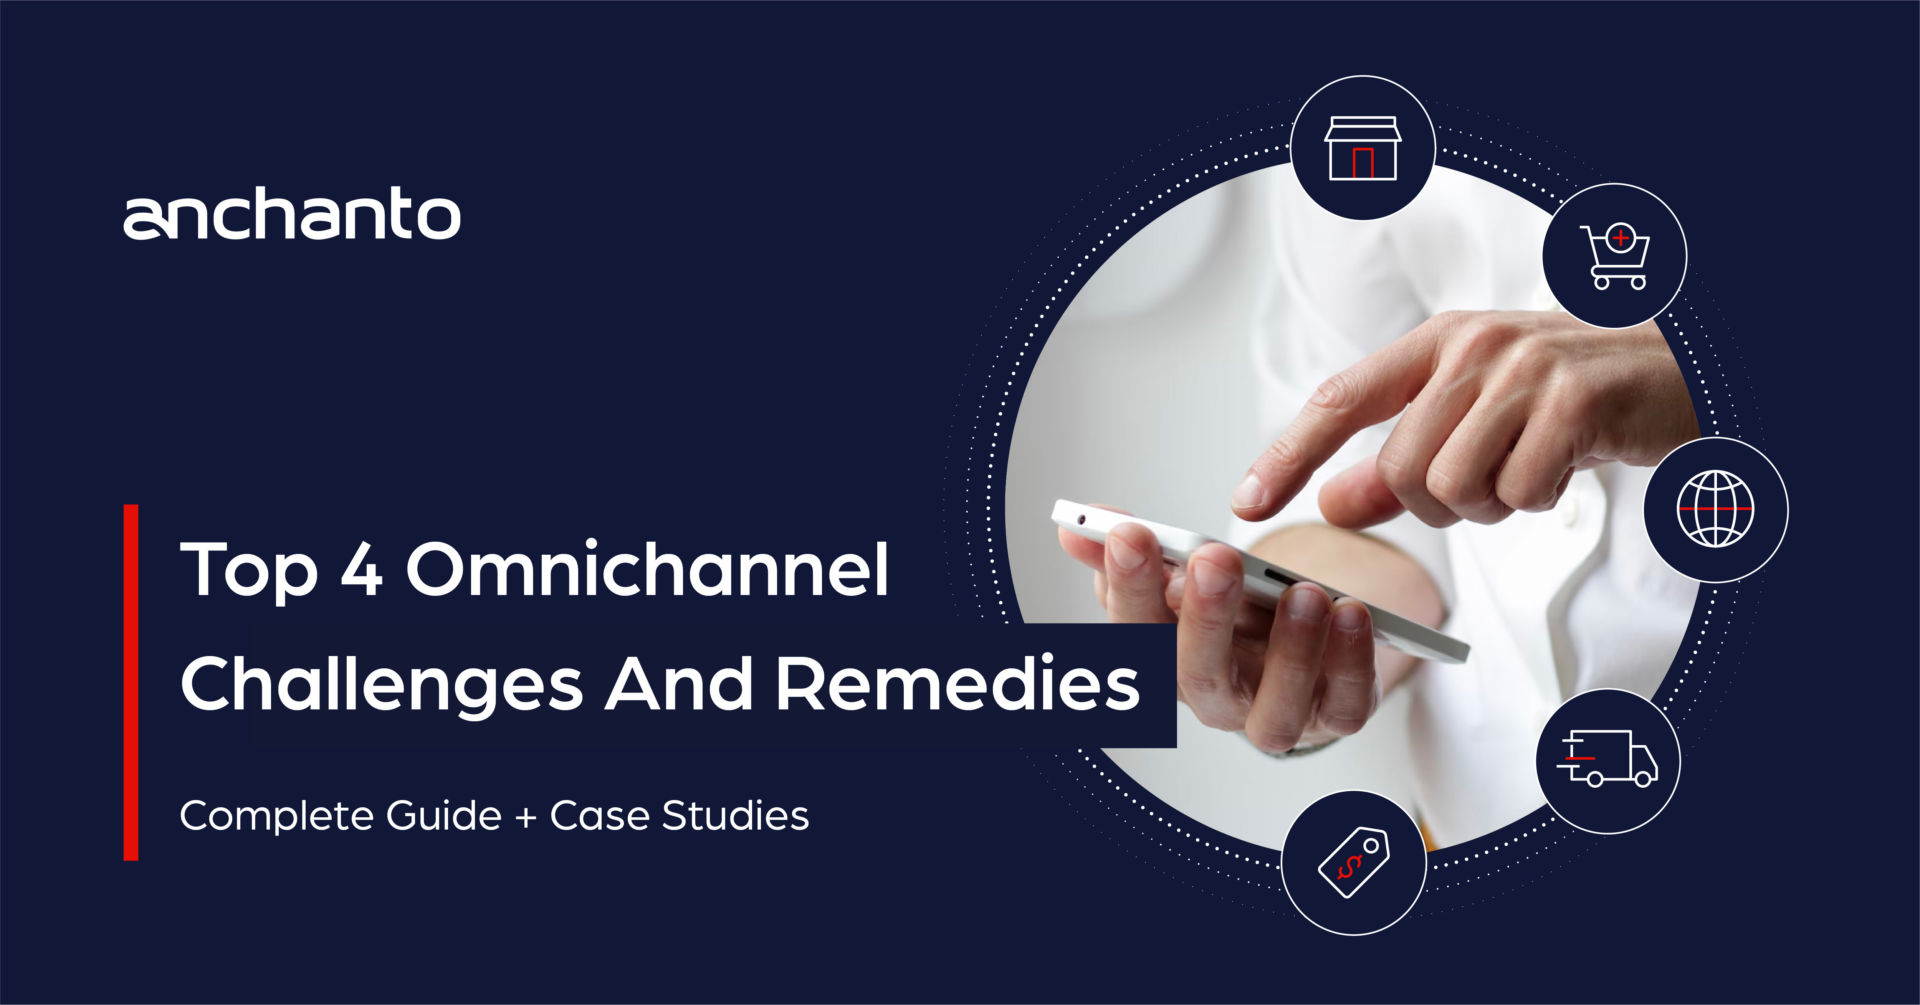 Top 4 Omnichannel Retail Challenges And Remedies: A Complete Guide + Case Studies